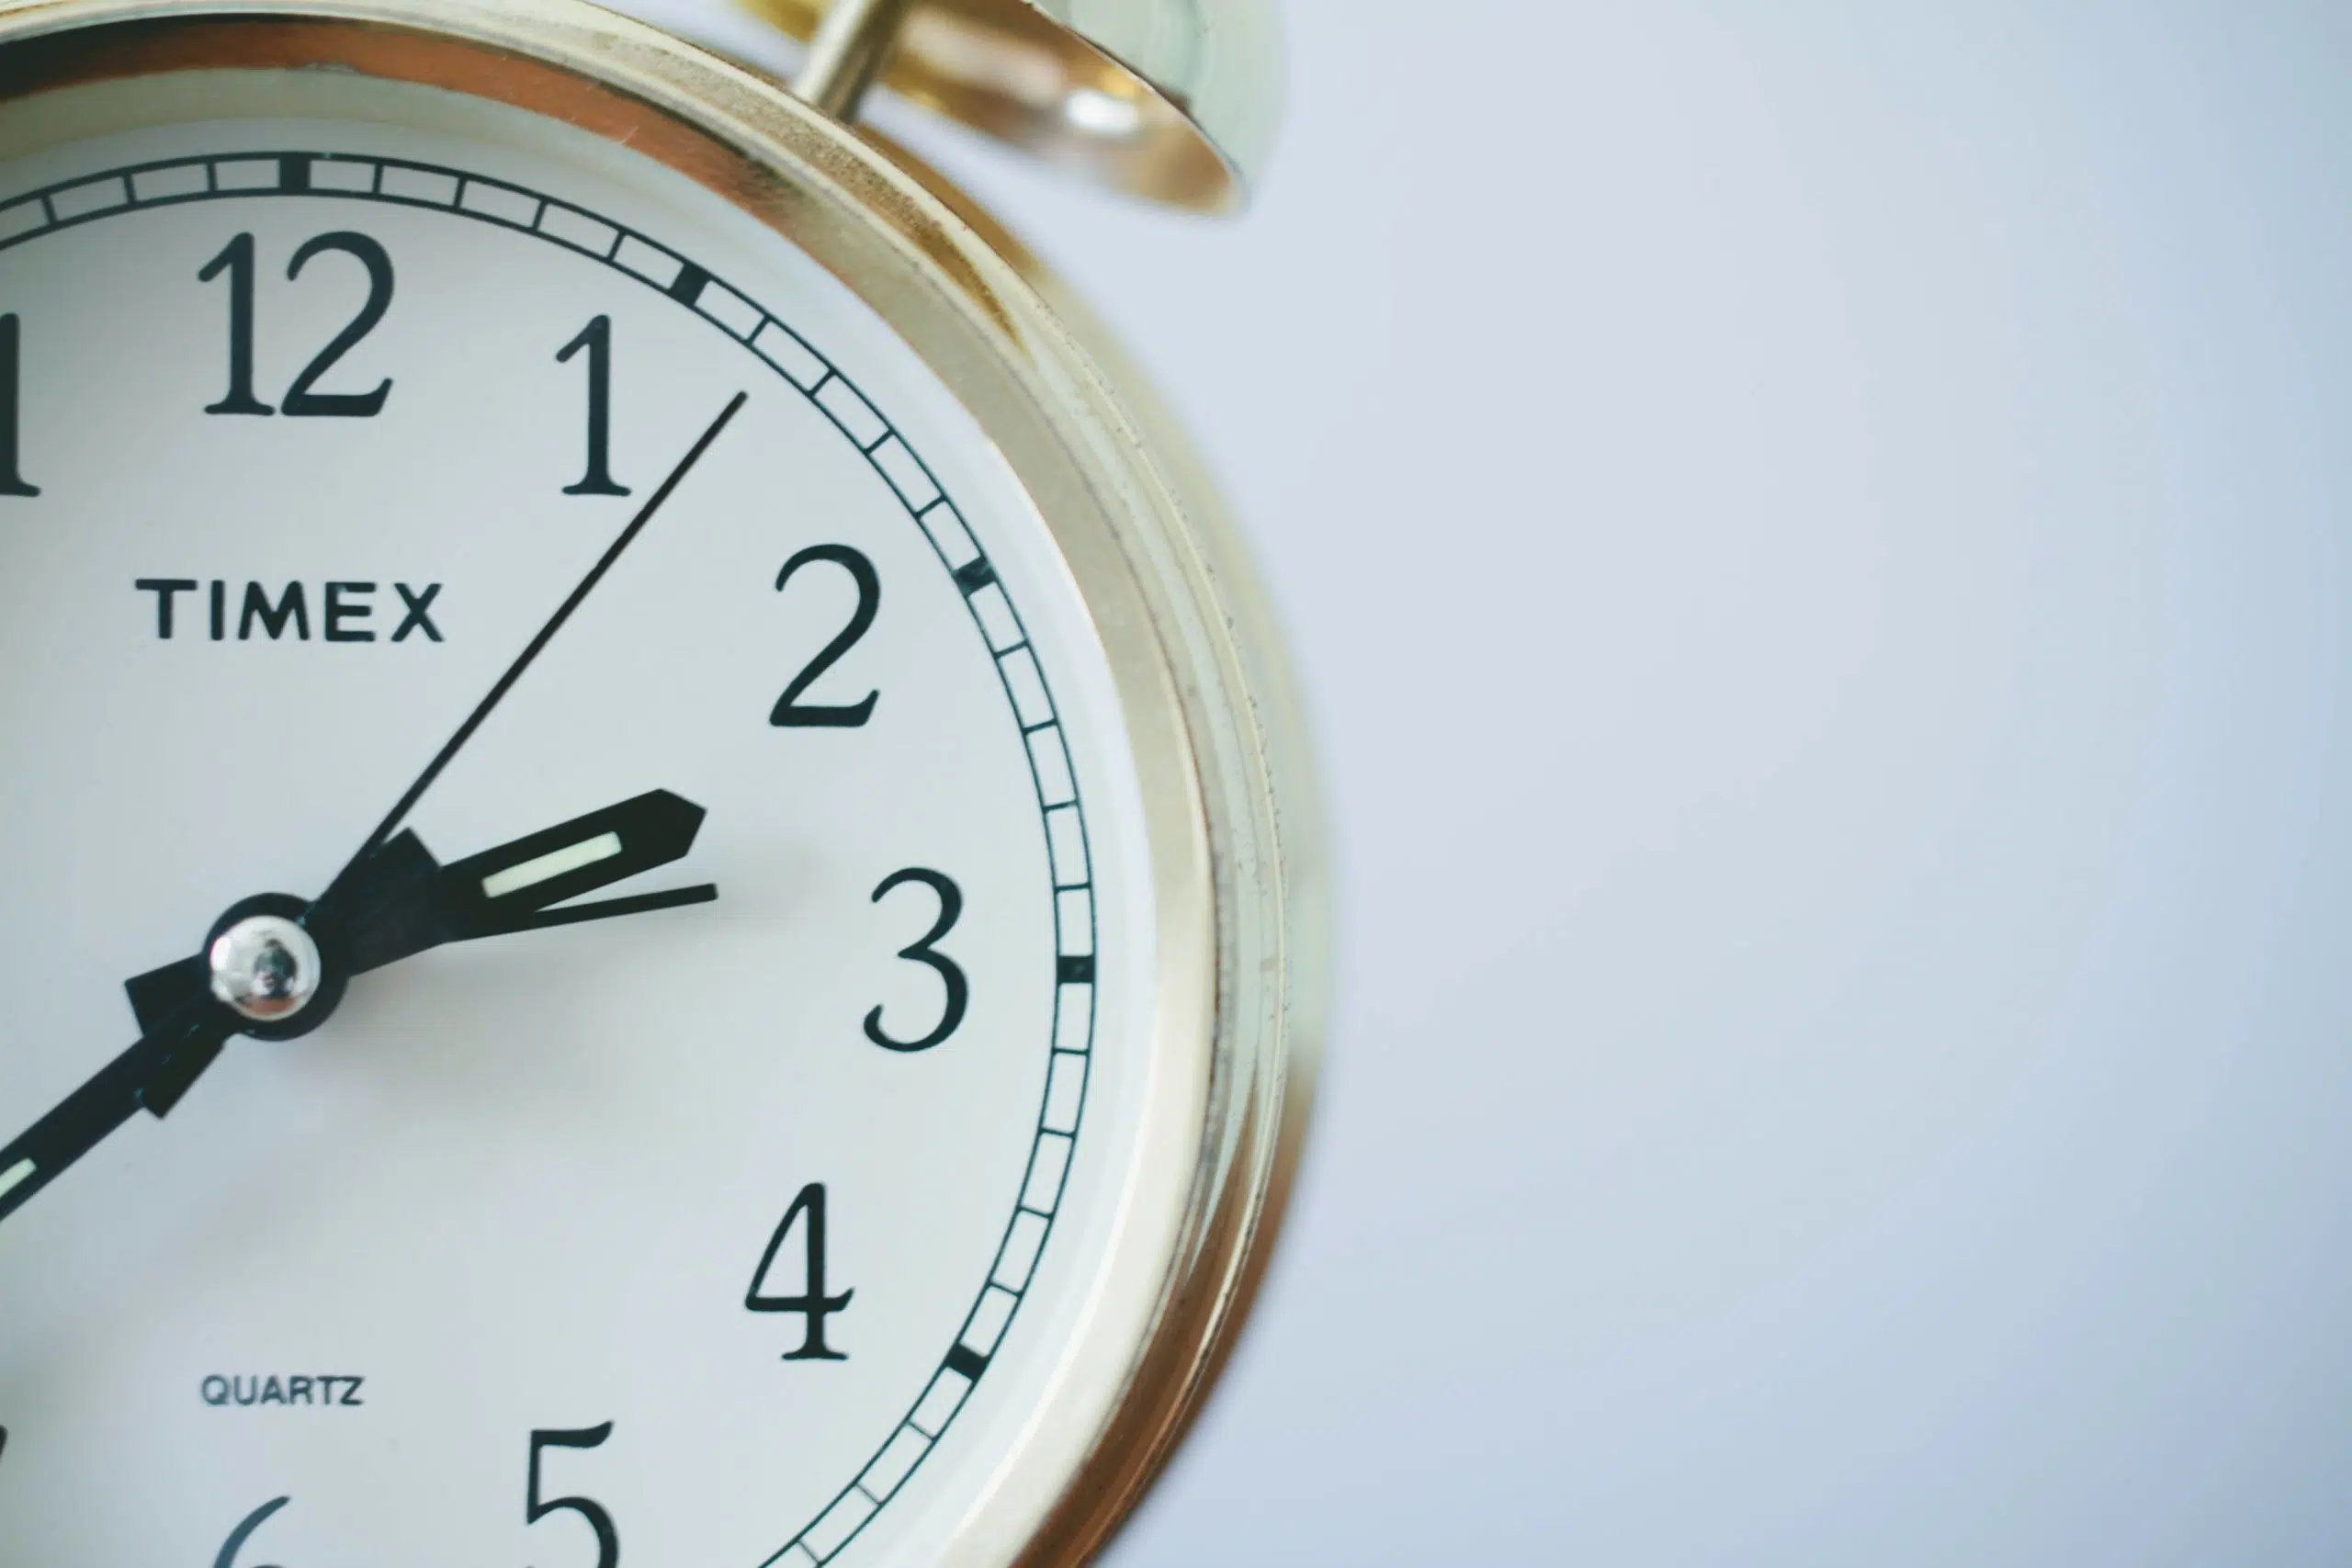 Expert says it's a bad idea to adopt Daylight Saving Time year-round